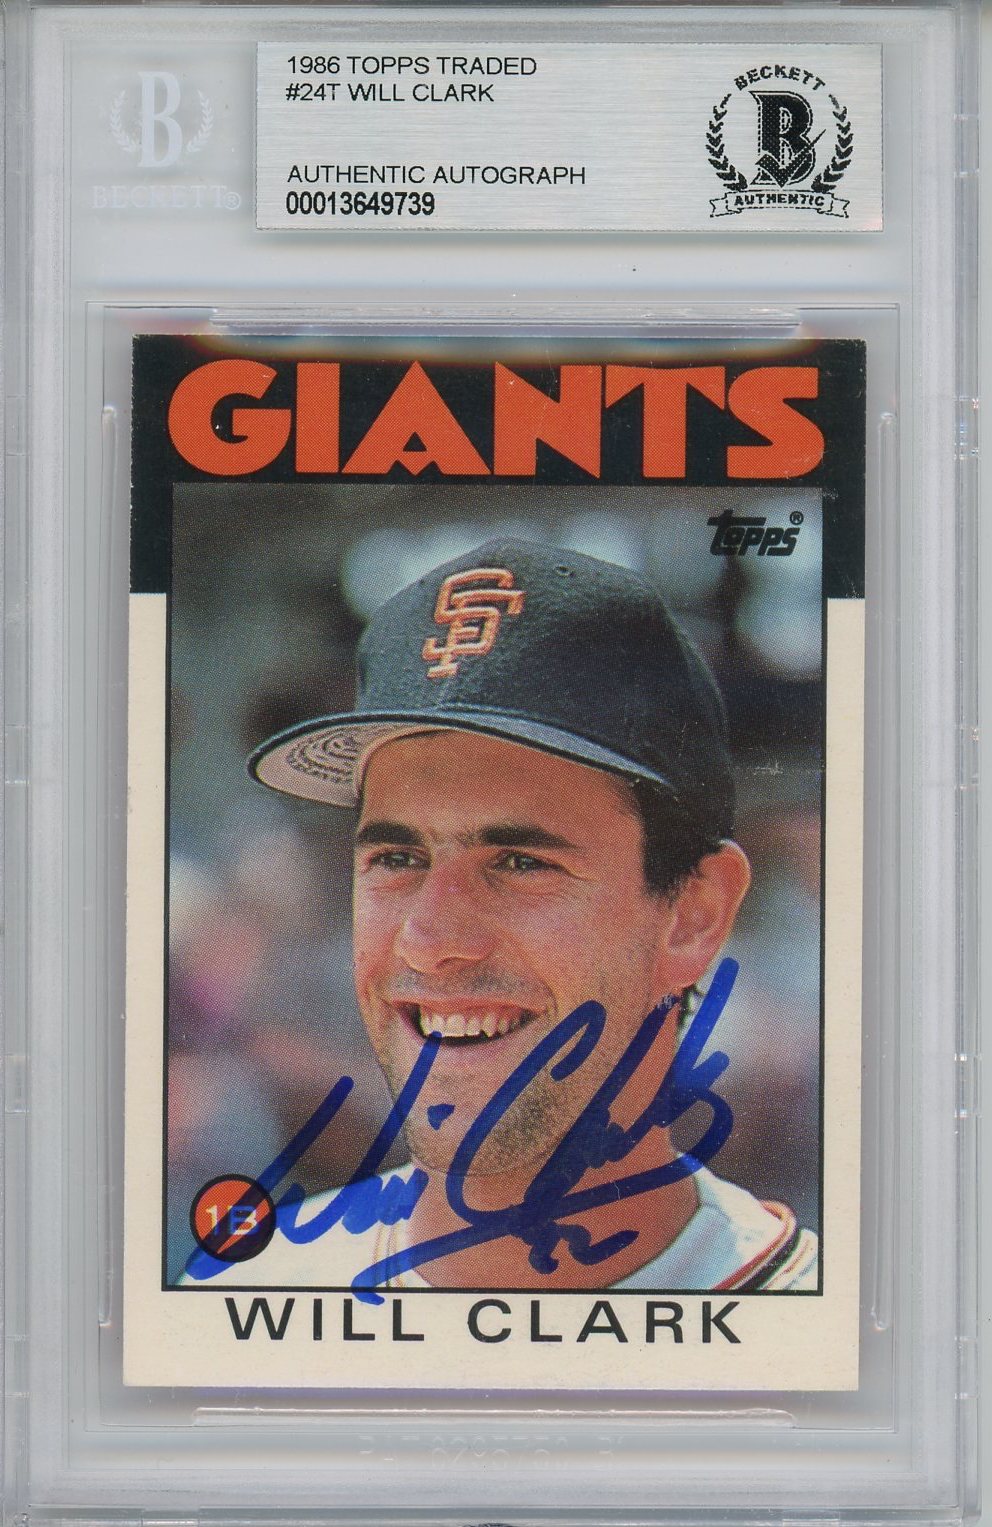 1986 TOPPS TRADED WILL CLARK ROOKIE #24T BAS AUTO